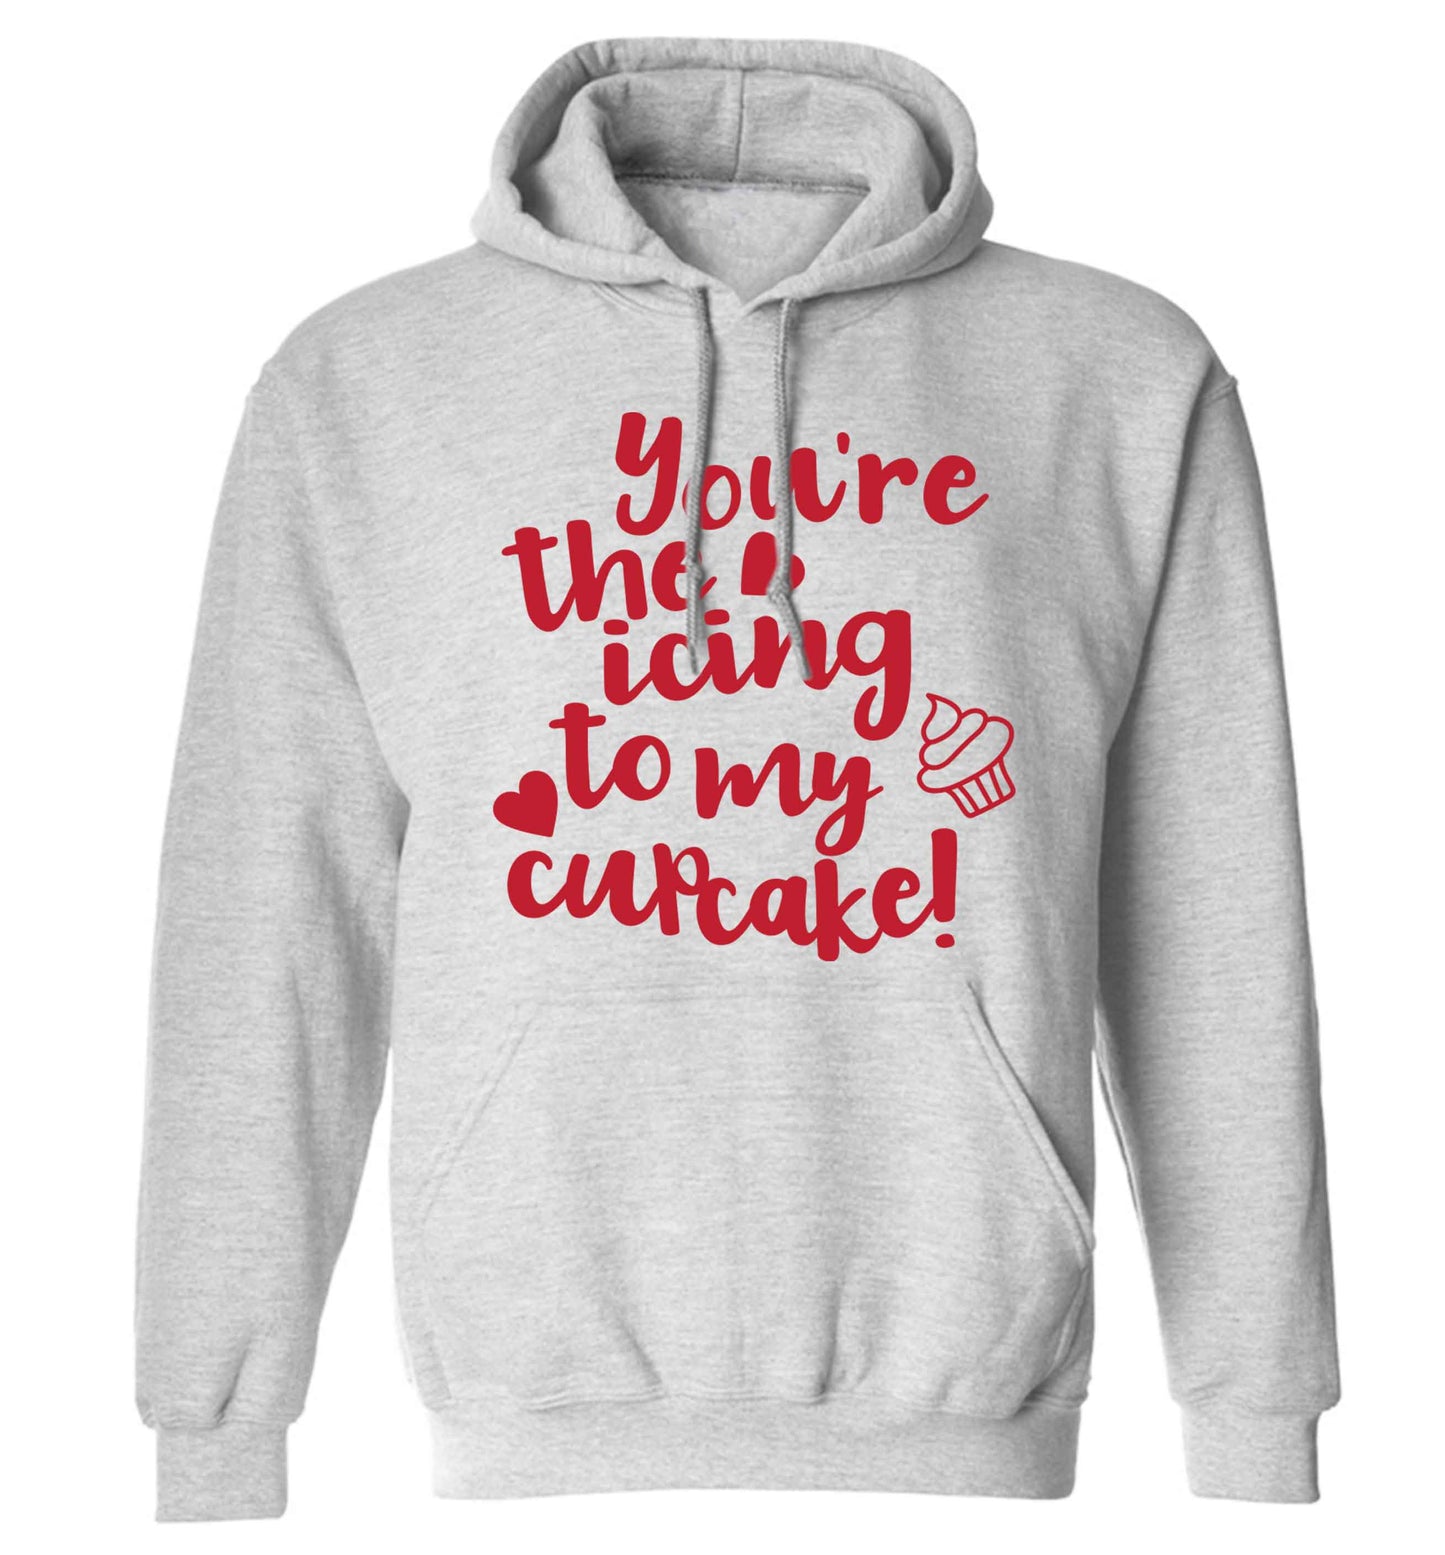 You're the icing to my cupcake adults unisex grey hoodie 2XL